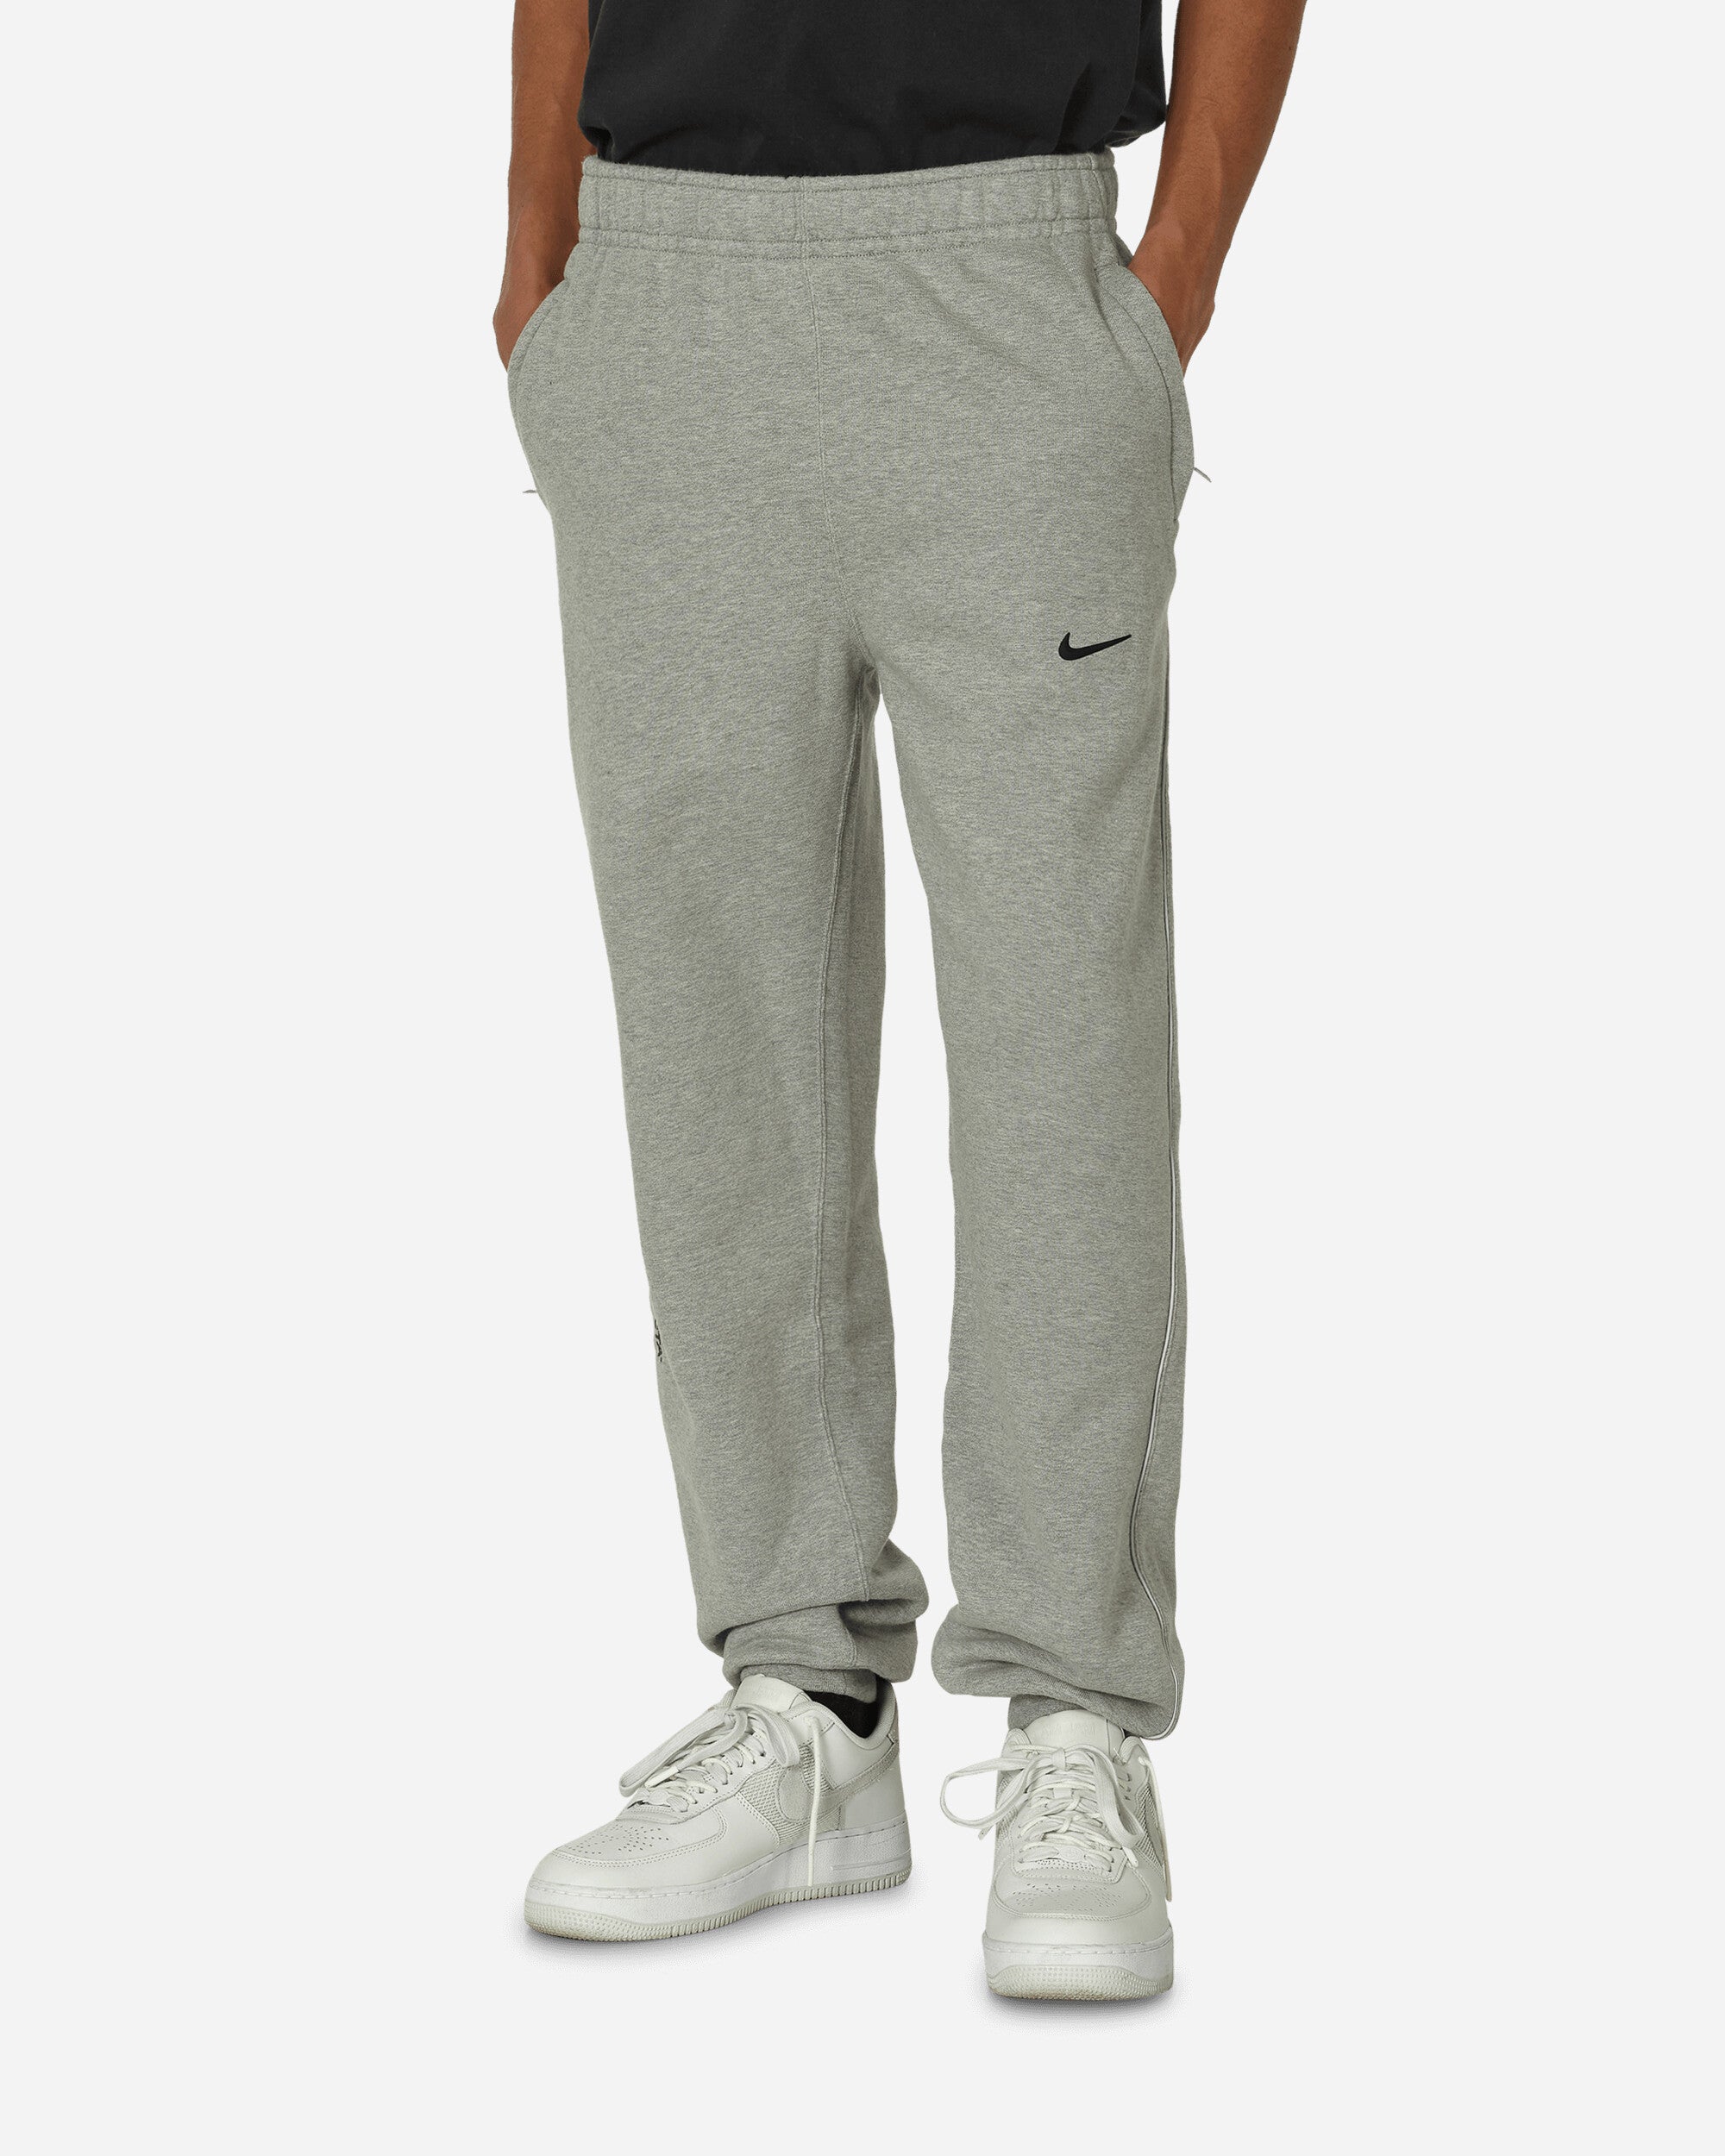 Nike x Nocta Warm - Up Pant – buy now at LangcomShops Online Store! - mint  green nike air max